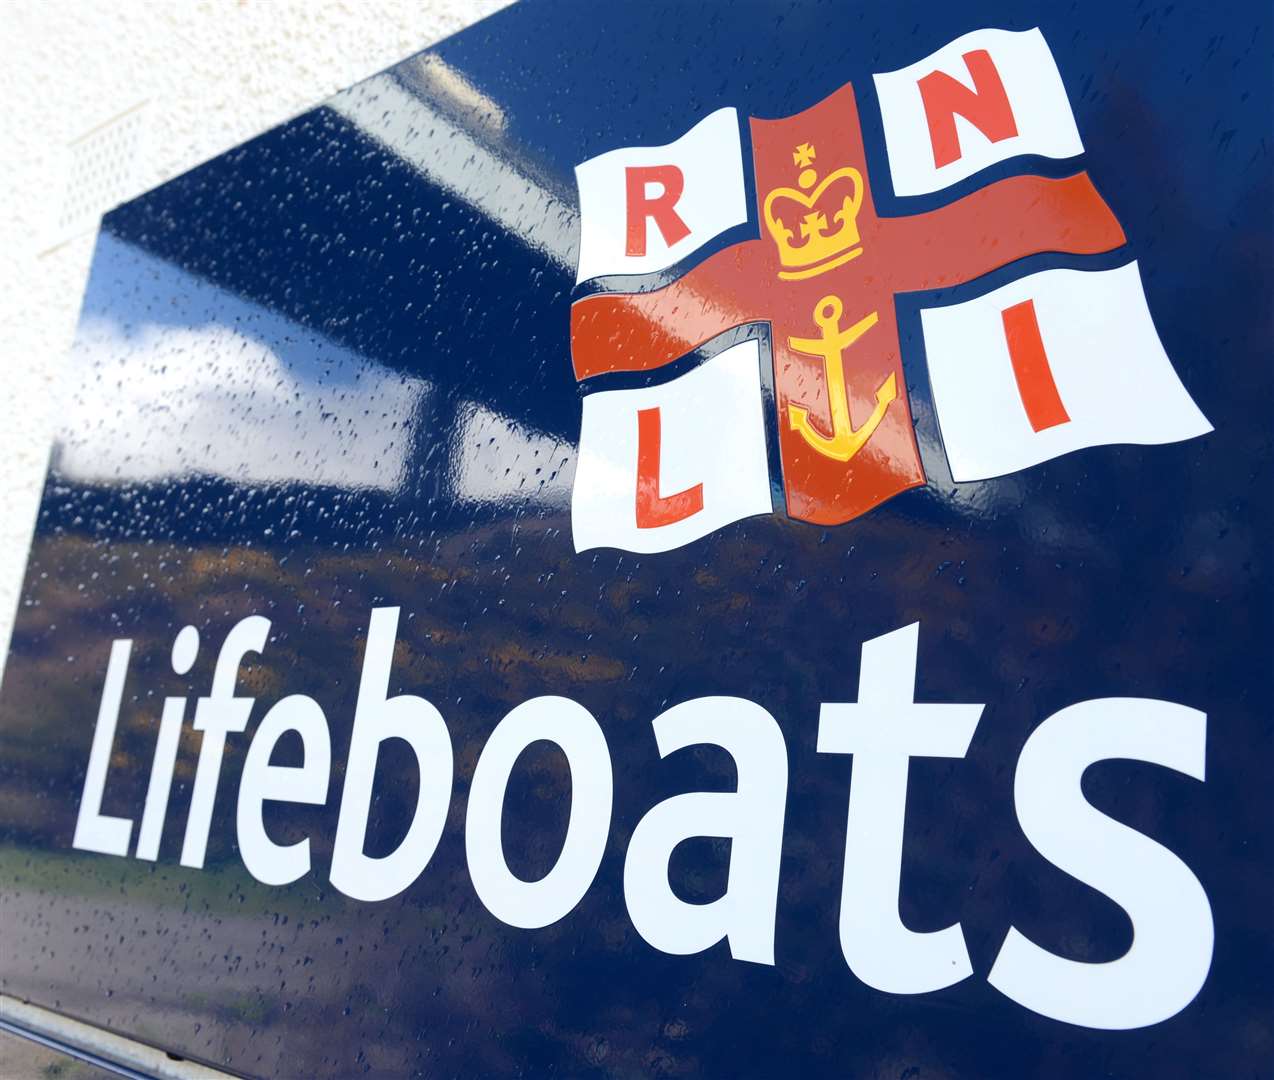 The event will raise funds for the RNLI's Kessock station.